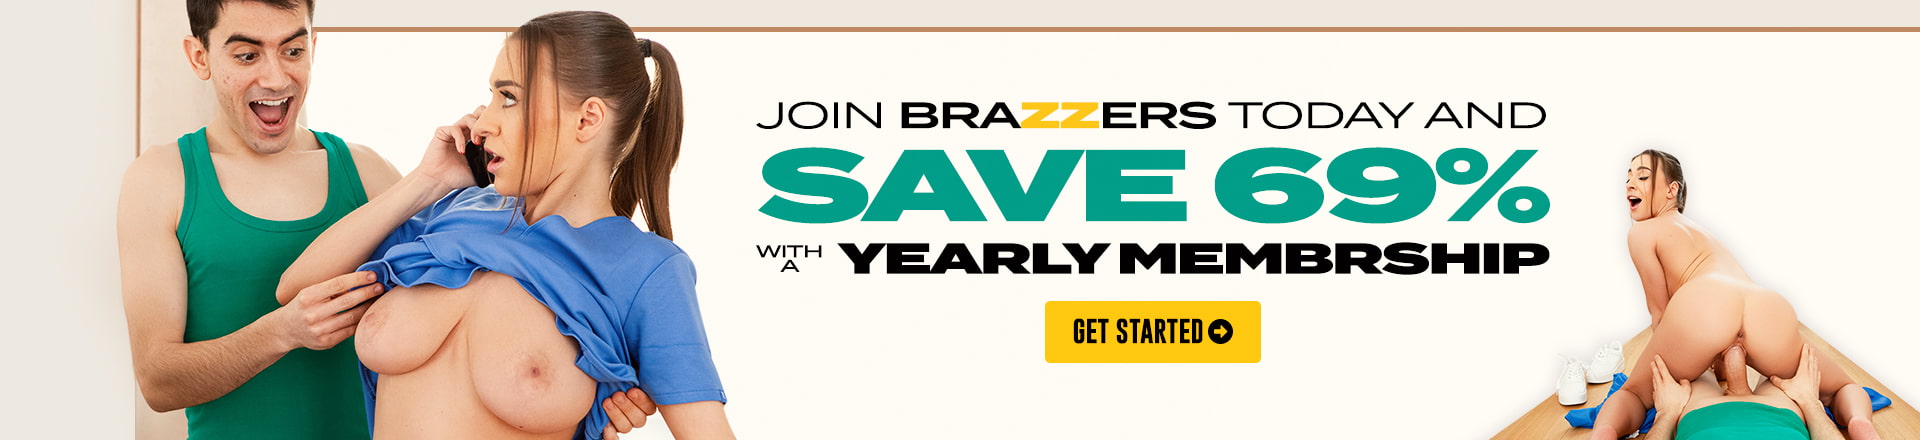 This is an advertisement banner for Brazzers